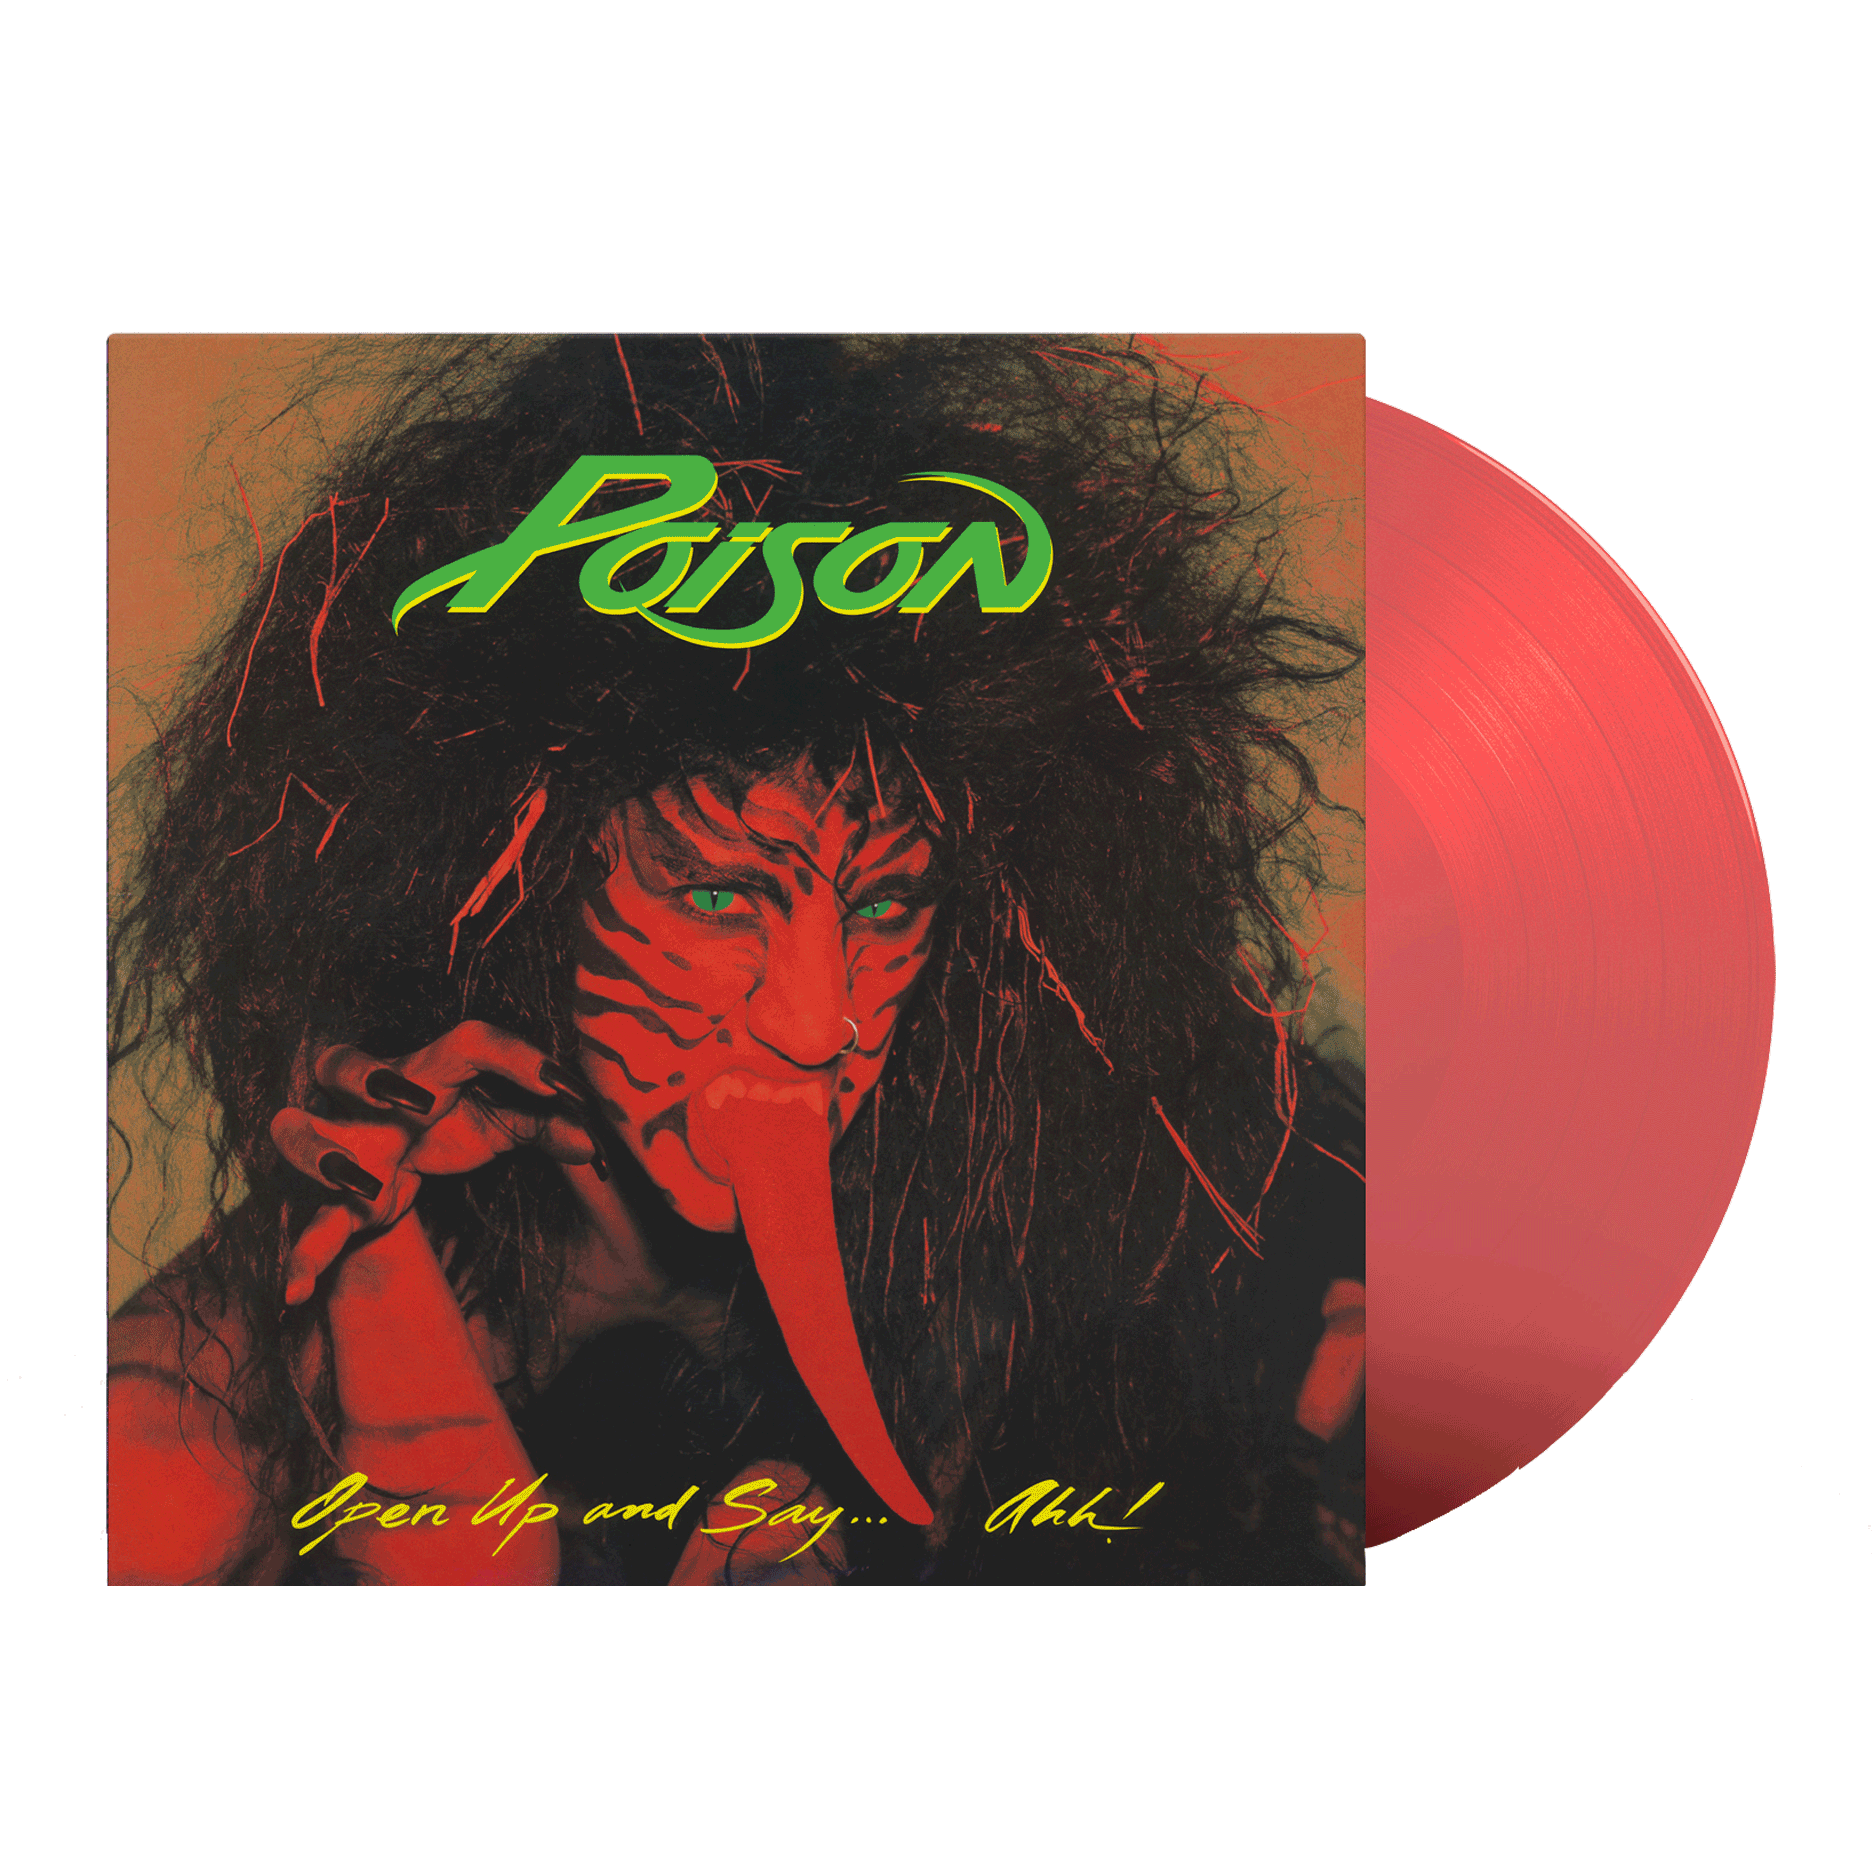 Poison - Open Up And Say . . . Ahh! Limited Red Vinyl LP